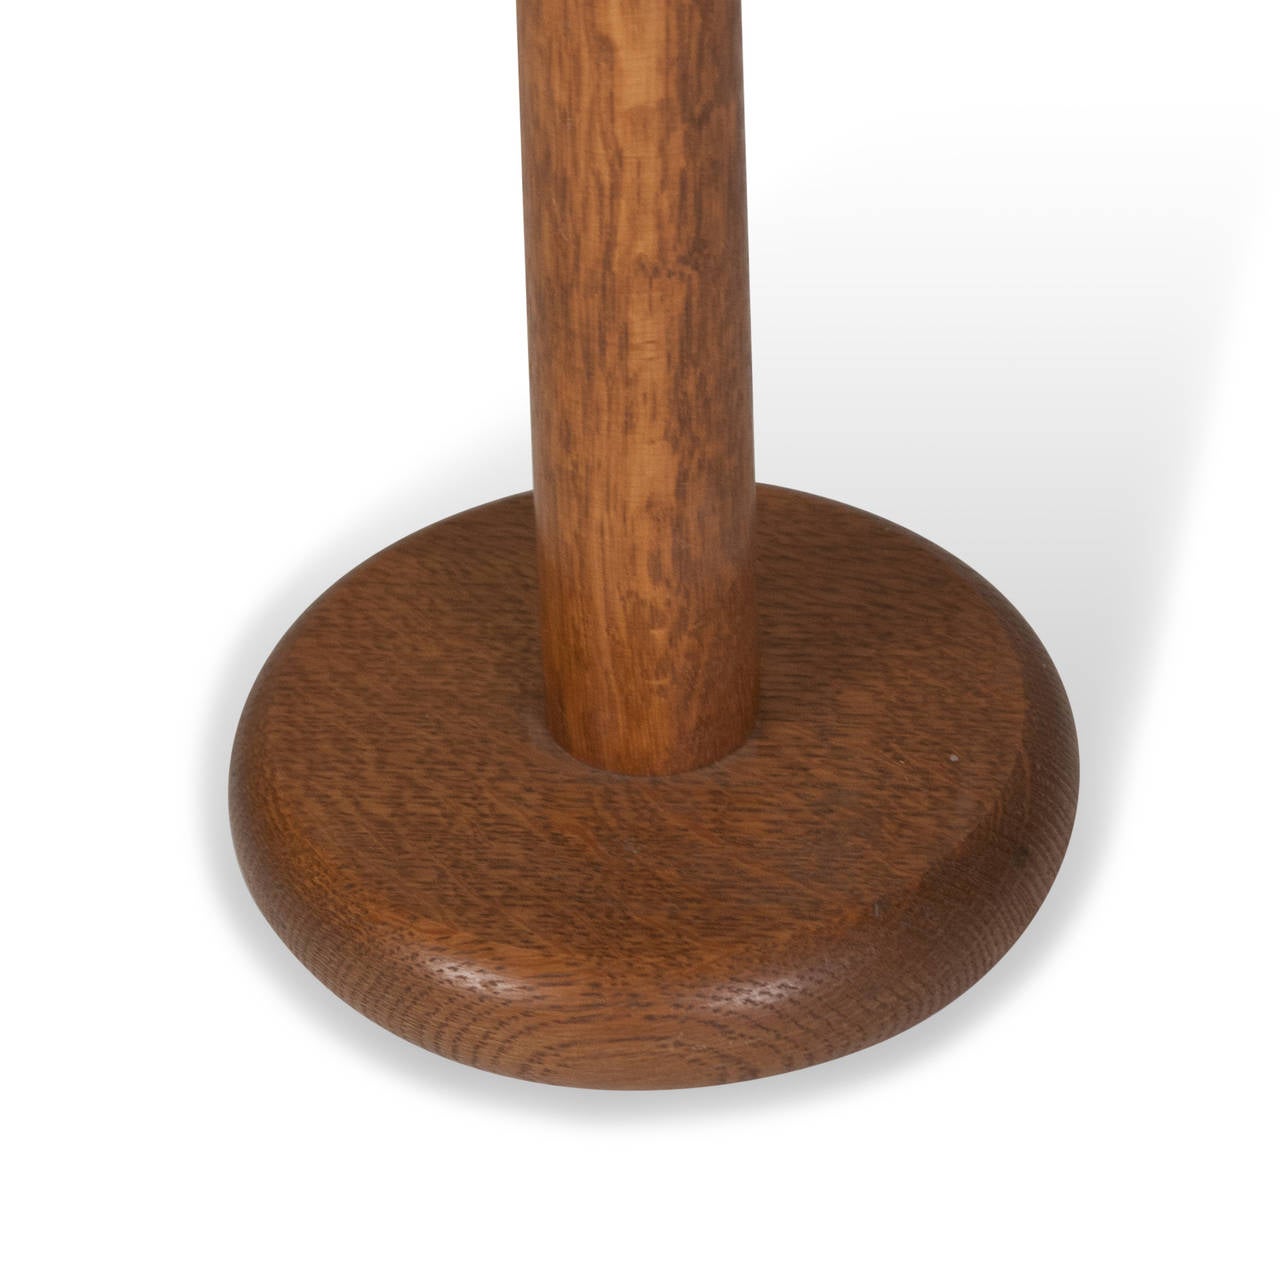 Turned Elm Wood Table Lamp In Excellent Condition For Sale In Brooklyn, NY